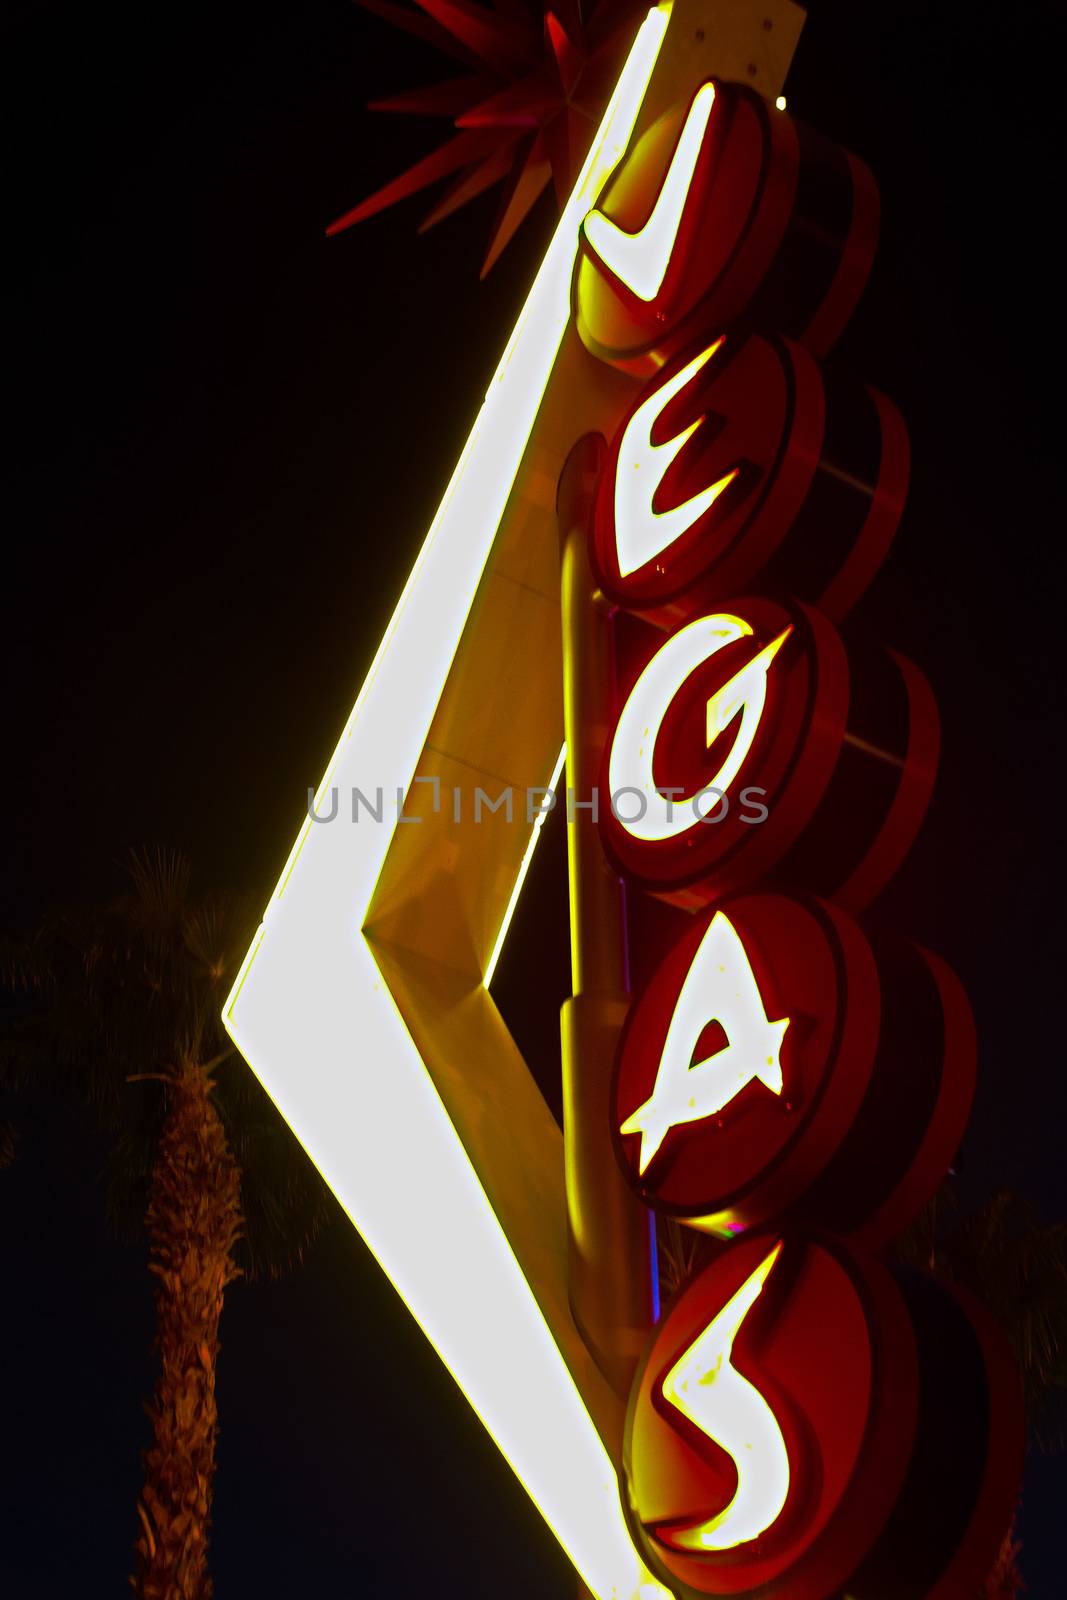 Vegas giant neon sign  on display above the street near Fremont Street Experience in Las Vegas. by USA-TARO